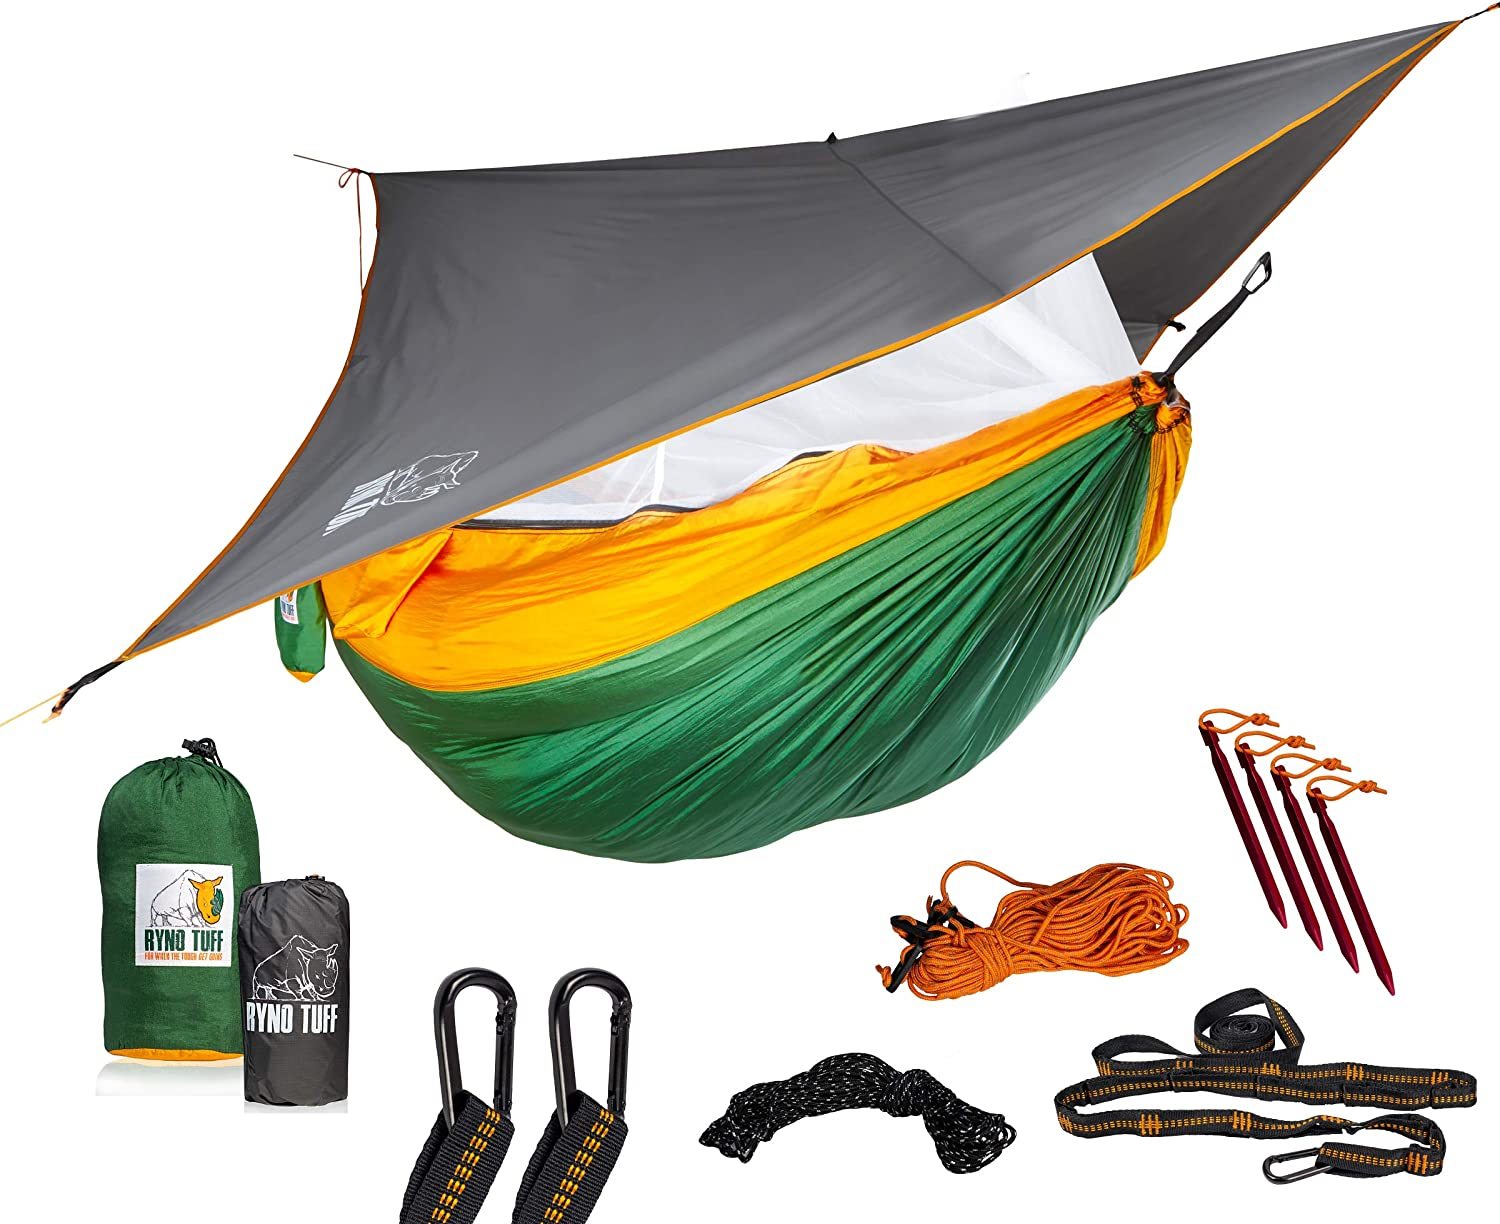 Primary image for Ryno Tuff Camping Hammock With Rainfly And Mosquito Net - Double Hammock With